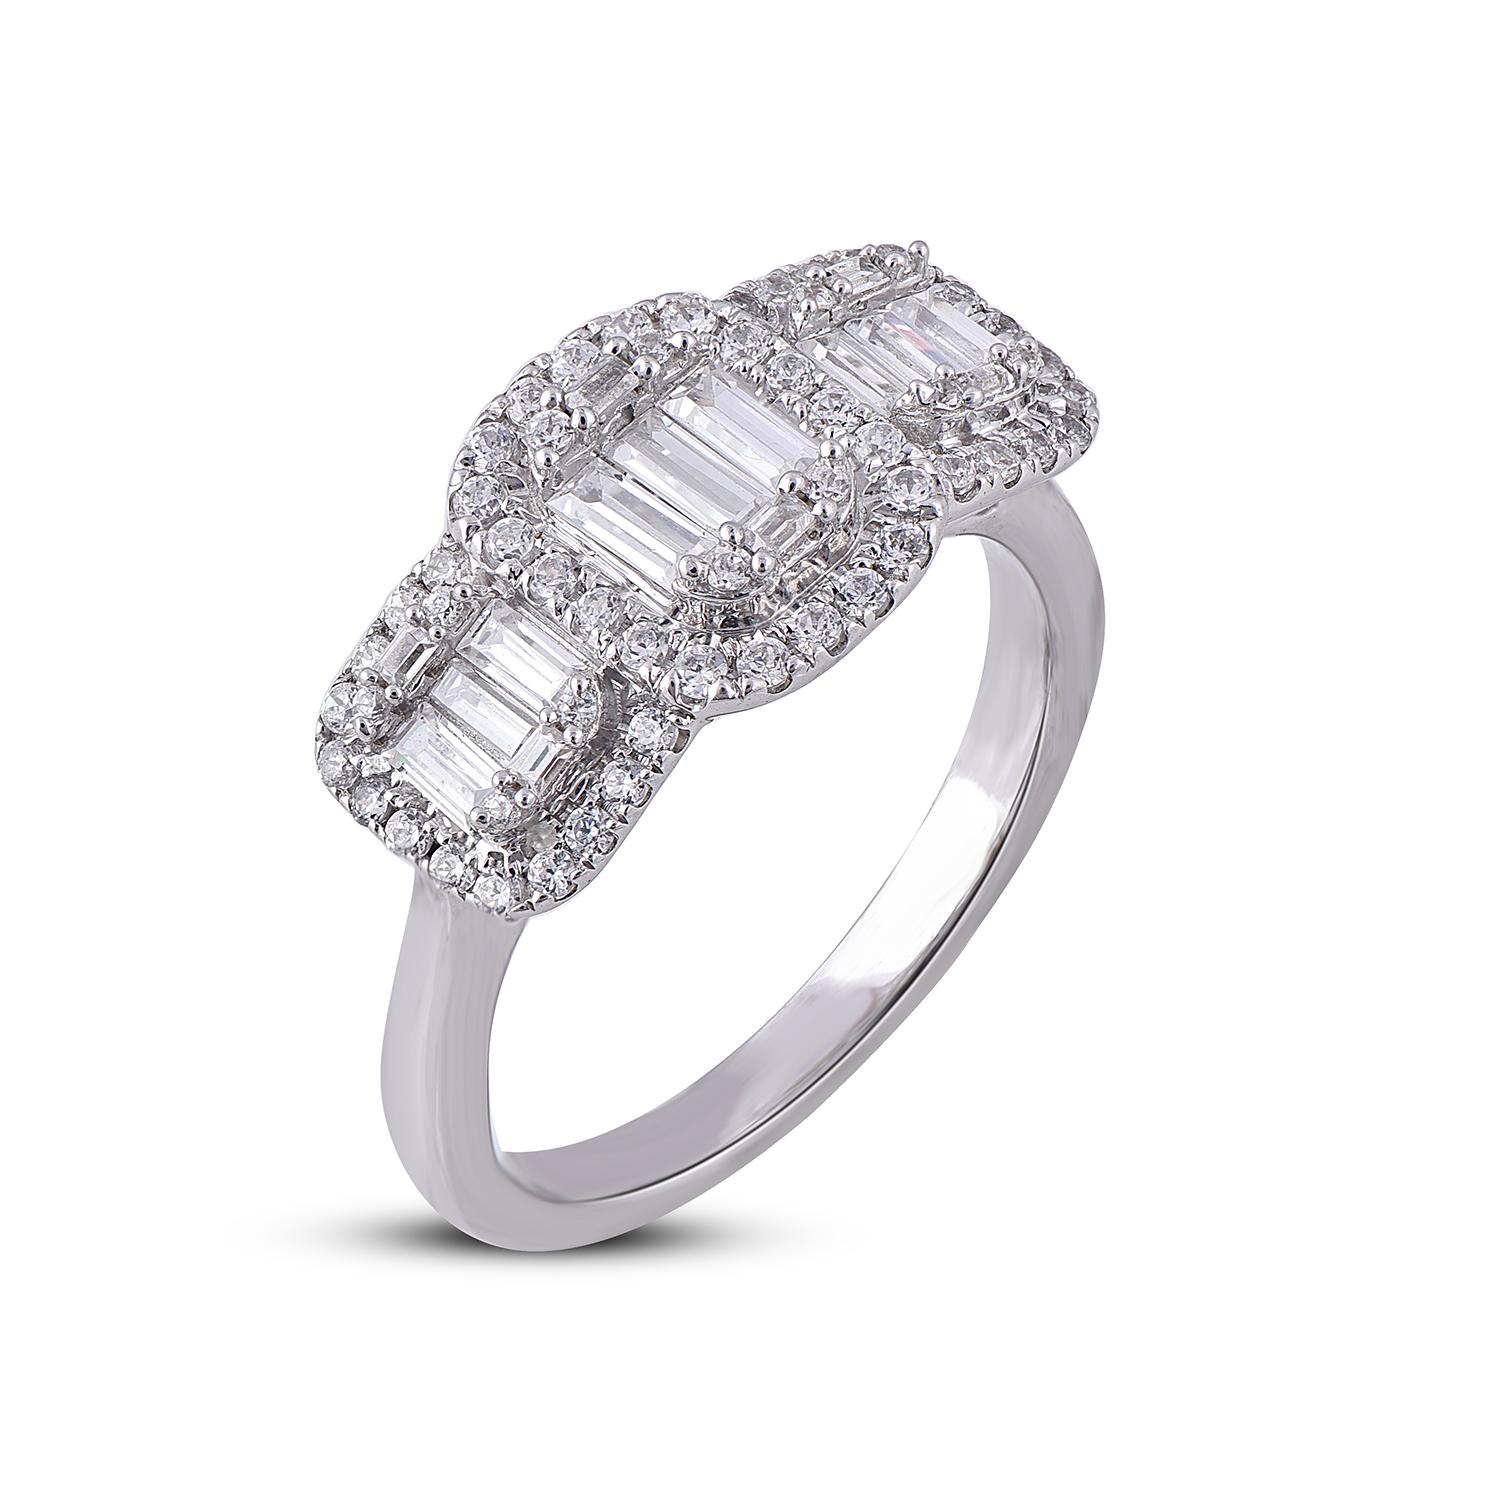 Exquisite 14 Karat gold 1.00 carat diamond ring. Expertly Crafted of sparkling 14 karat White gold in high polish finish and set with 52 sparkling round and 15 baguette cut diamond set in channel and pave setting, We only use 100% natural and